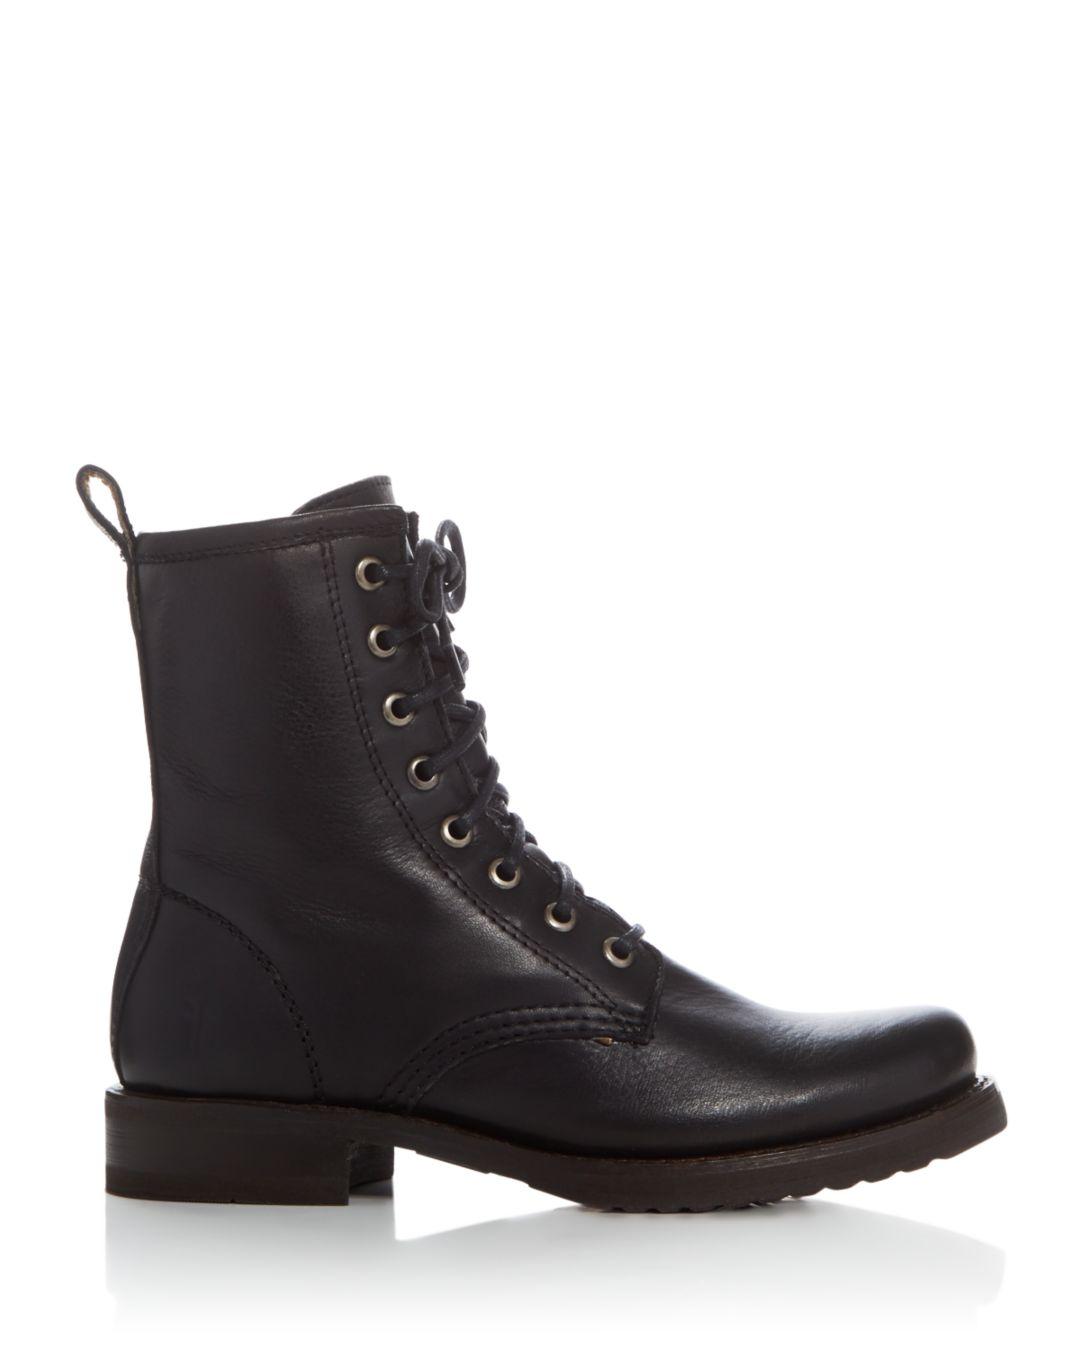 Frye Leather Veronica Combat Boots in Black Soft Vintage Leather (Black ...